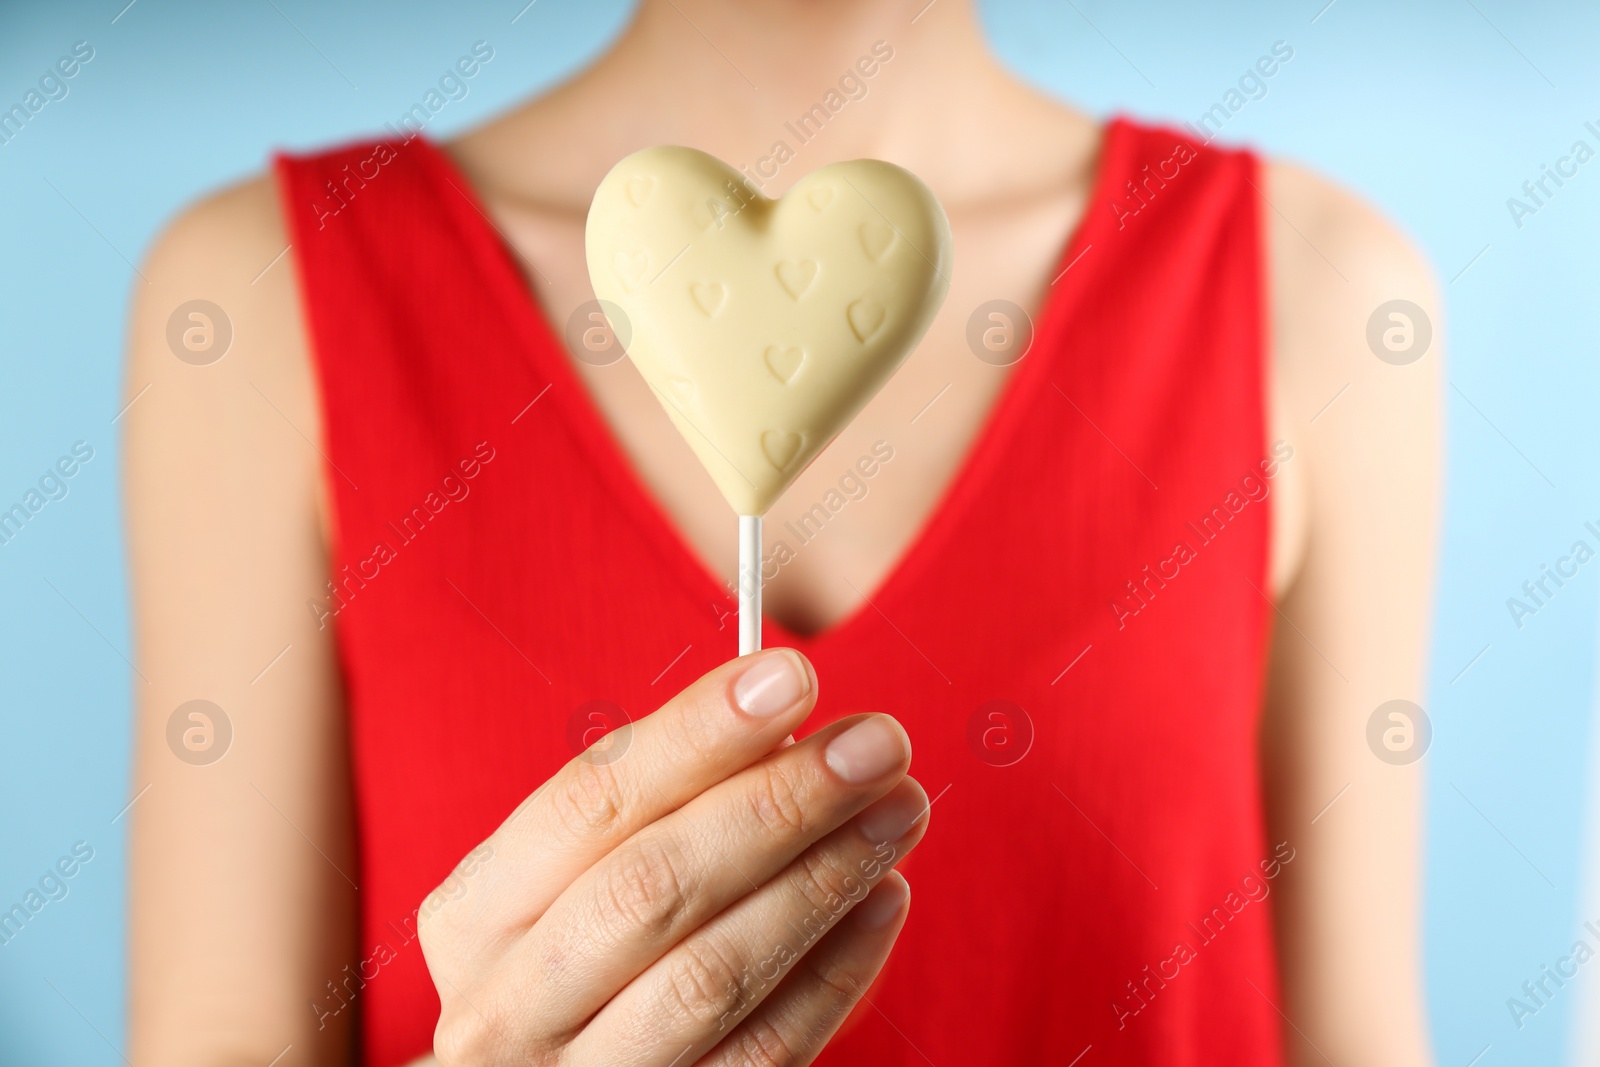 Photo of Woman holding heart shaped lollipop made of chocolate on light blue background, closeup